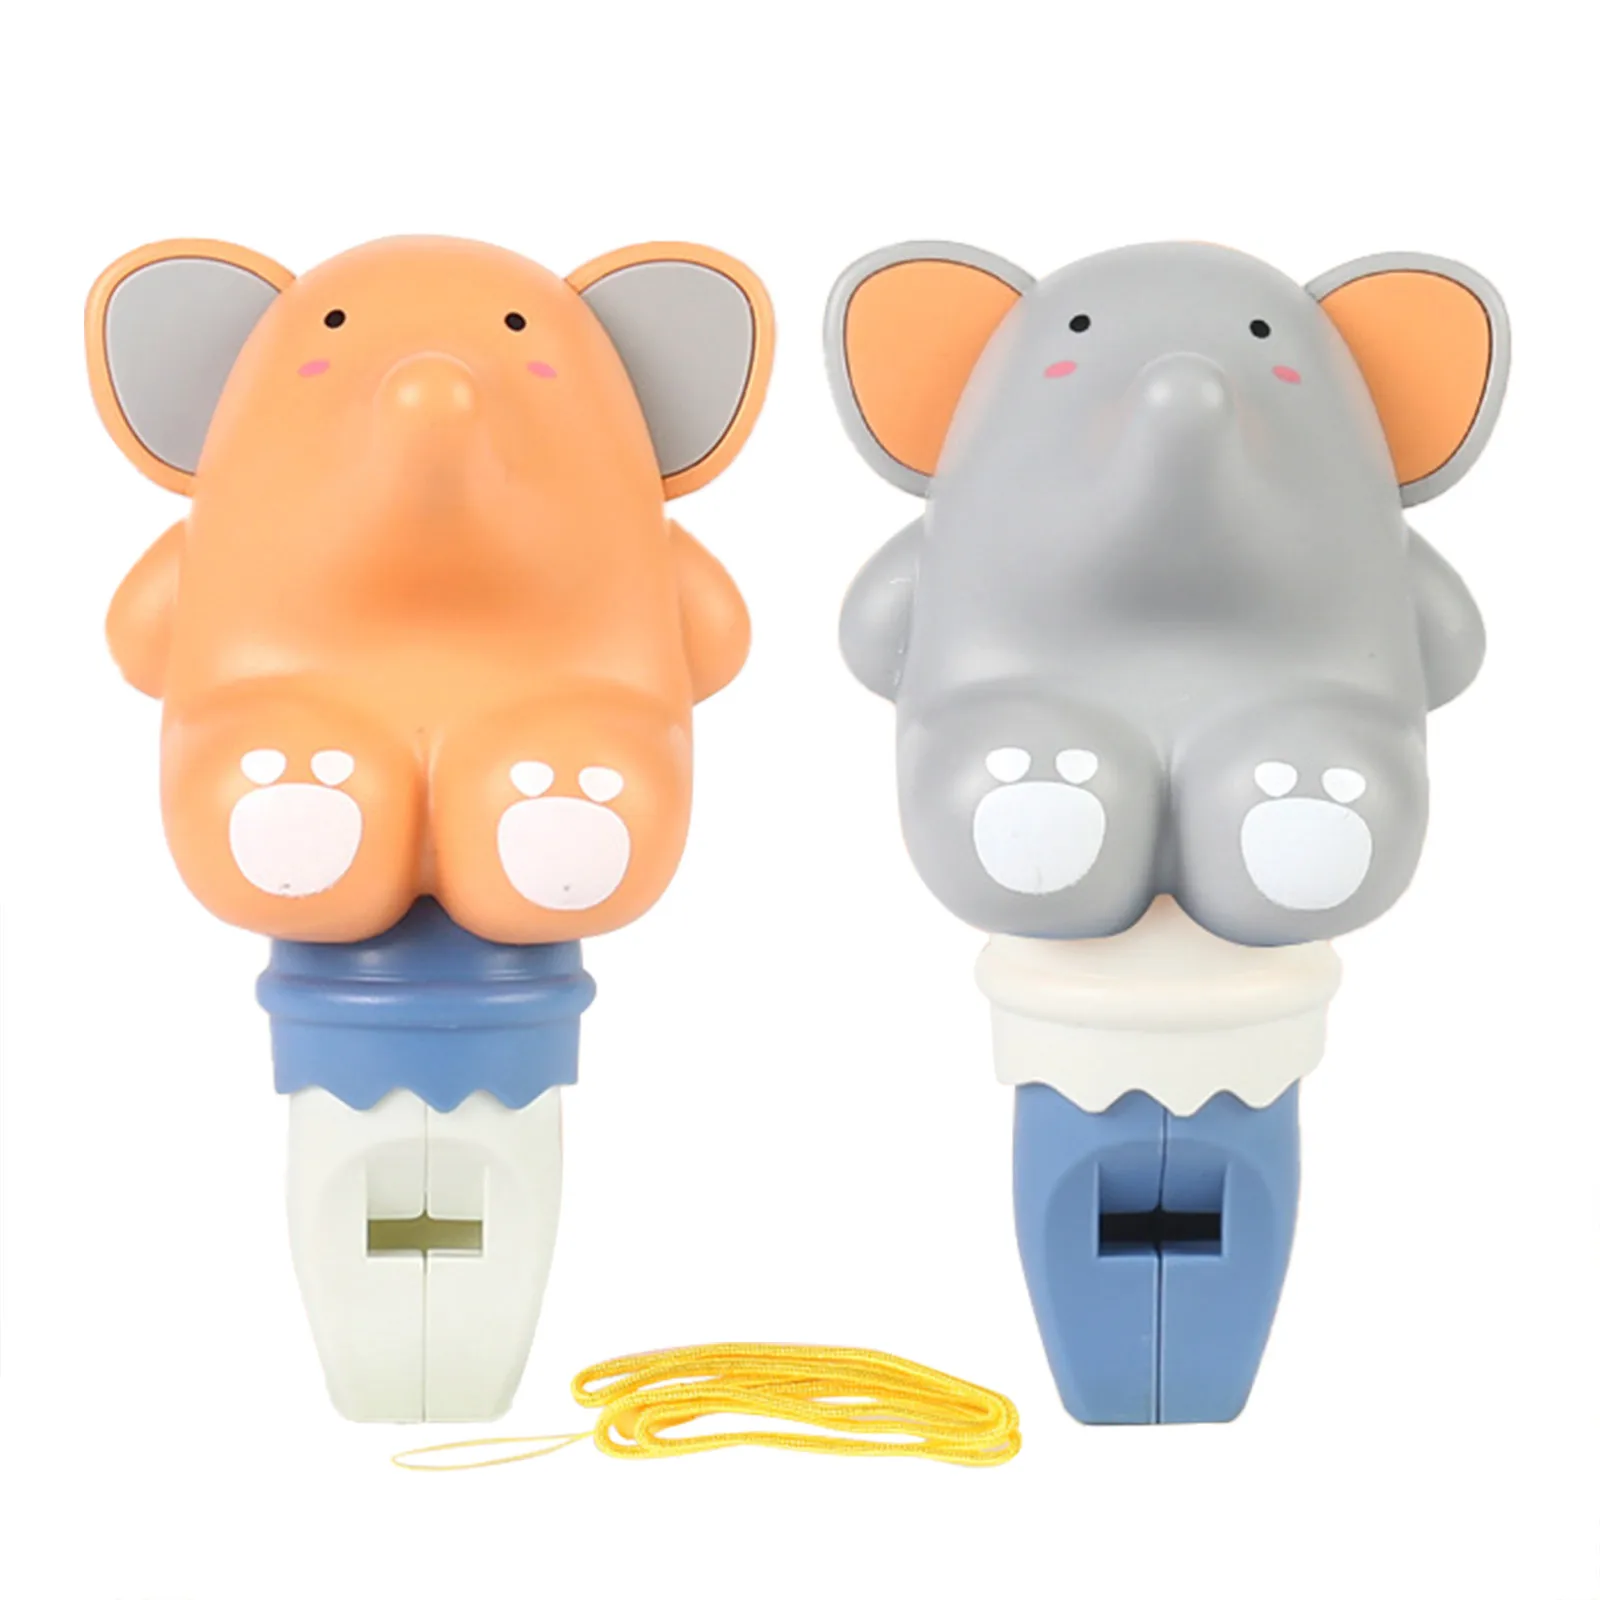 

HOT SALE Cute Animal Whistle Toy Kids Music Instrument Toy Noisemaker Toys Sound Toys Educational Toys Birthday Party Favors